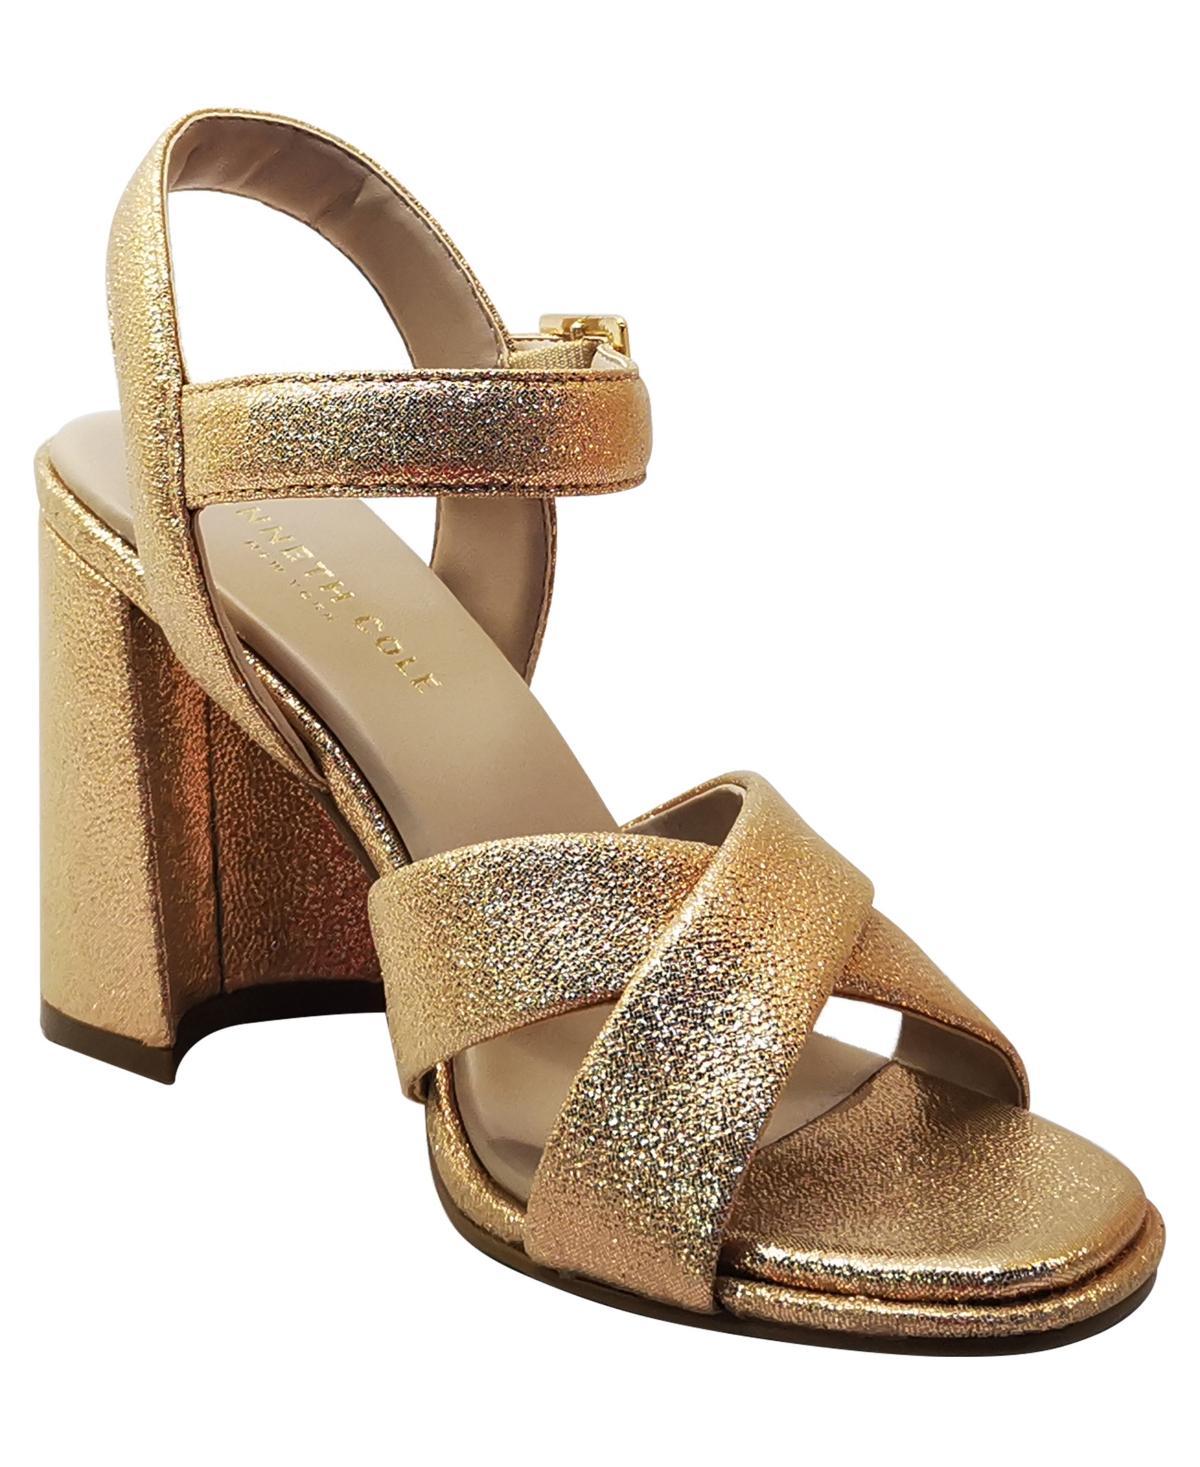 Kenneth Cole New York Womens Lessia Dress Sandals Womens Shoes Product Image